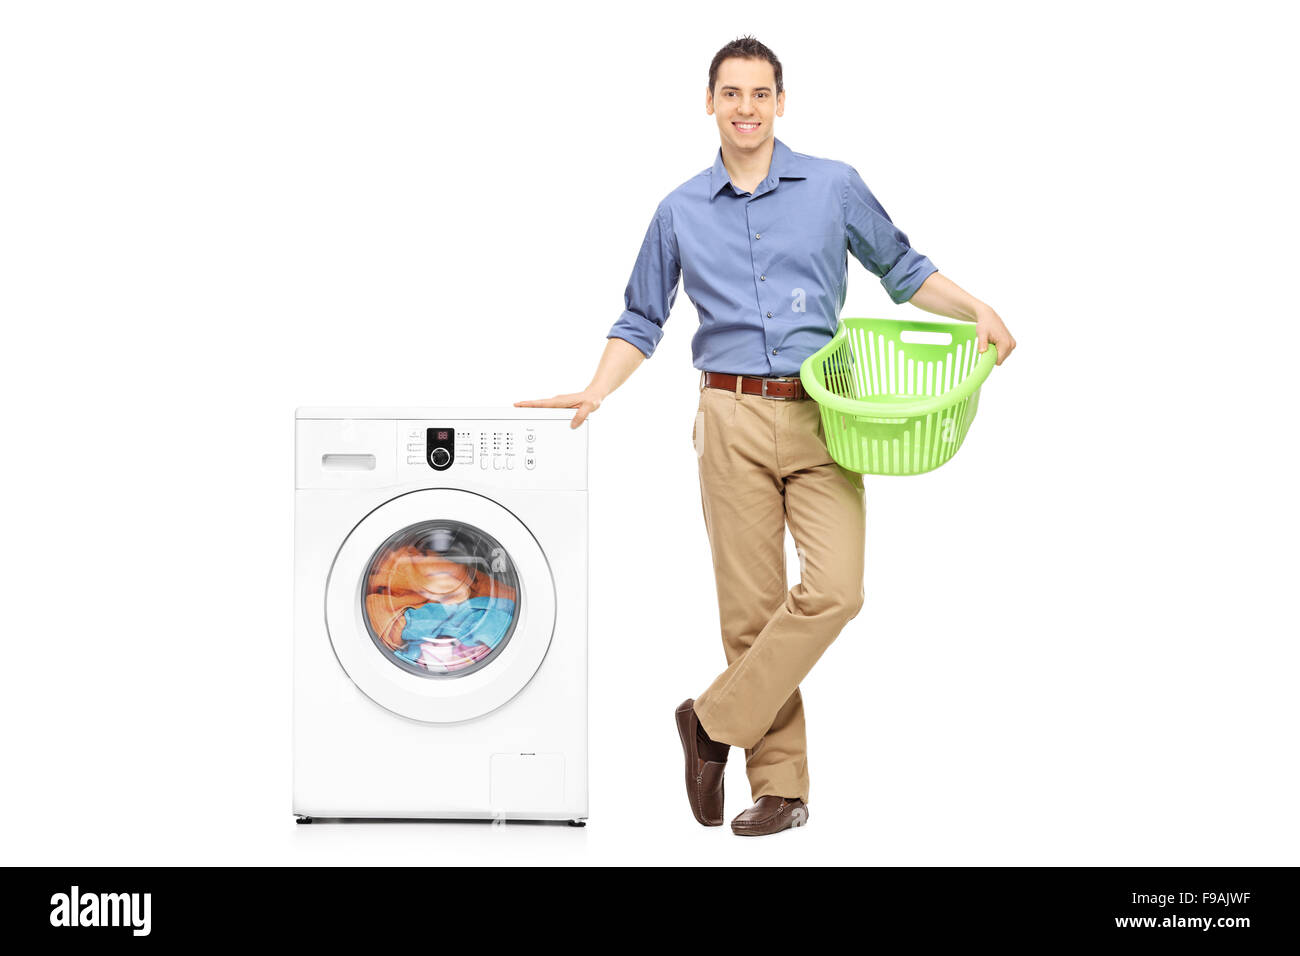 Full length portrait of a young guy holding an empty laundry basket and waiting for the washing machine to finish Stock Photo